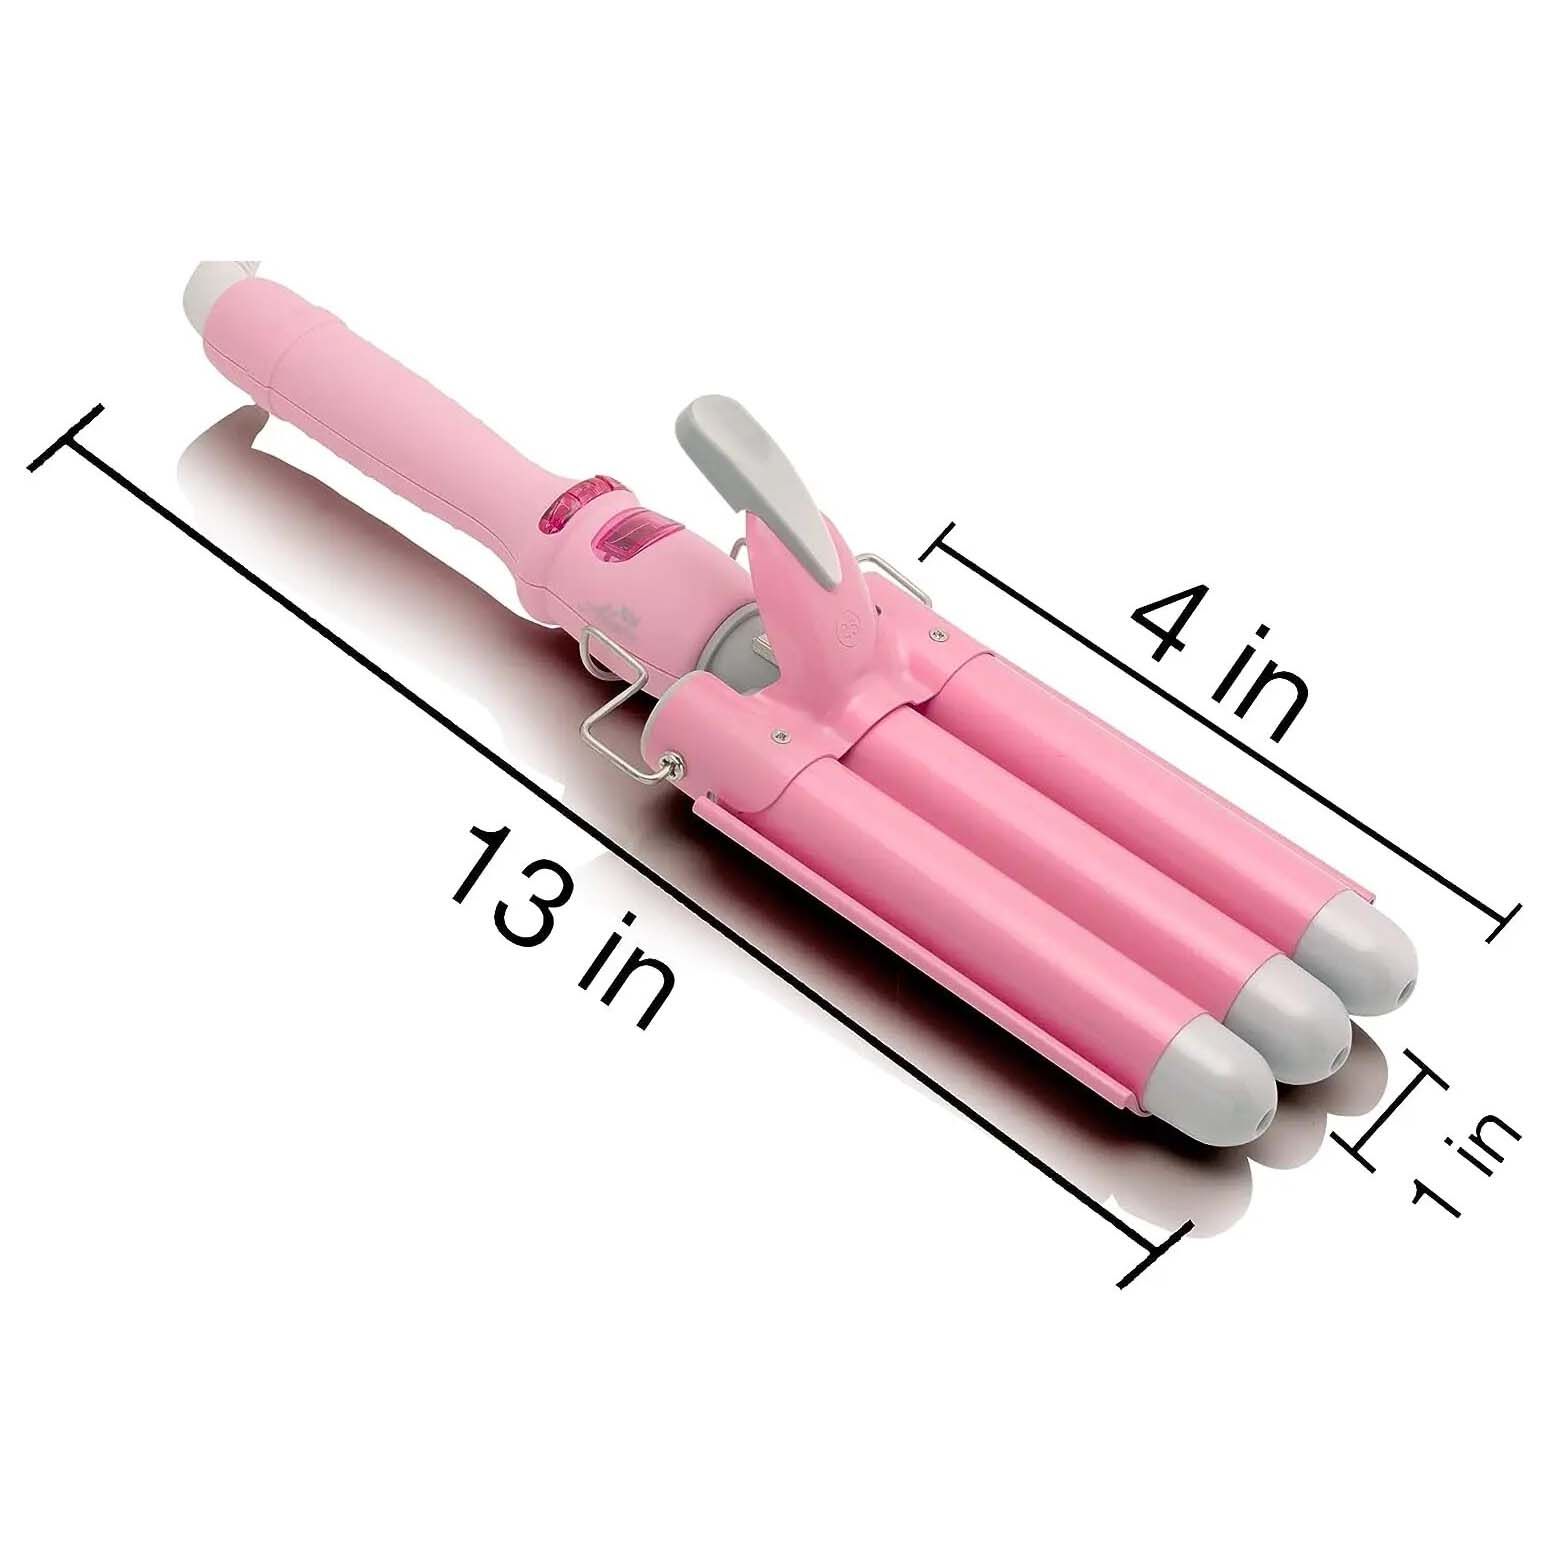 Wave Ceramic Triple Barrel Curling Iron Wand with LCD Display 